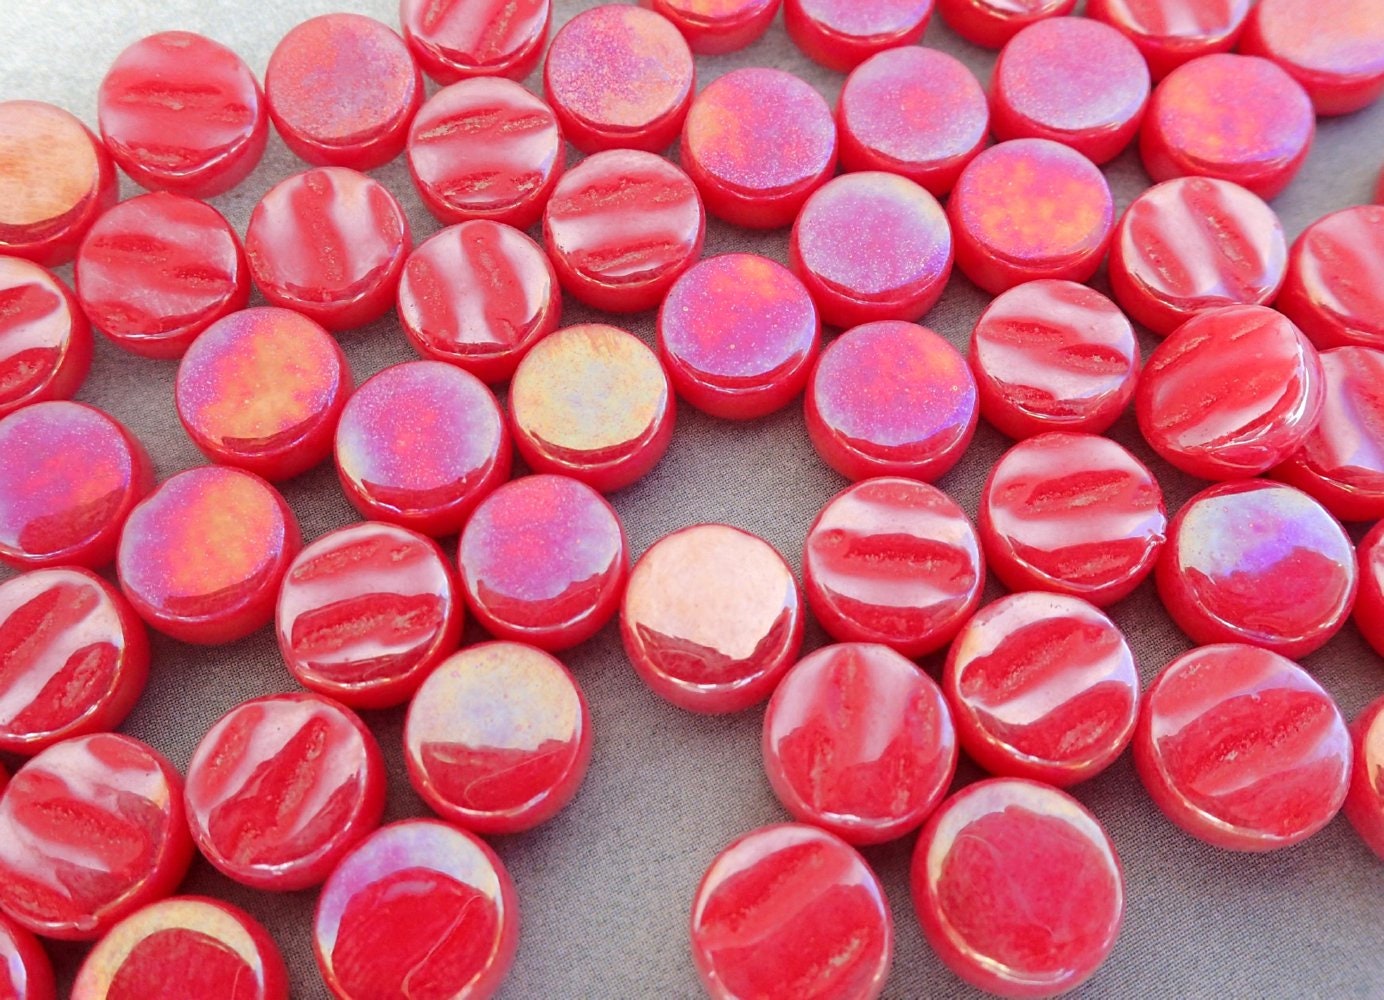 Watermelon Red Iridescent MINI Glass Drops Mosaic Tiles - 50 grams - Over 100 Tiles